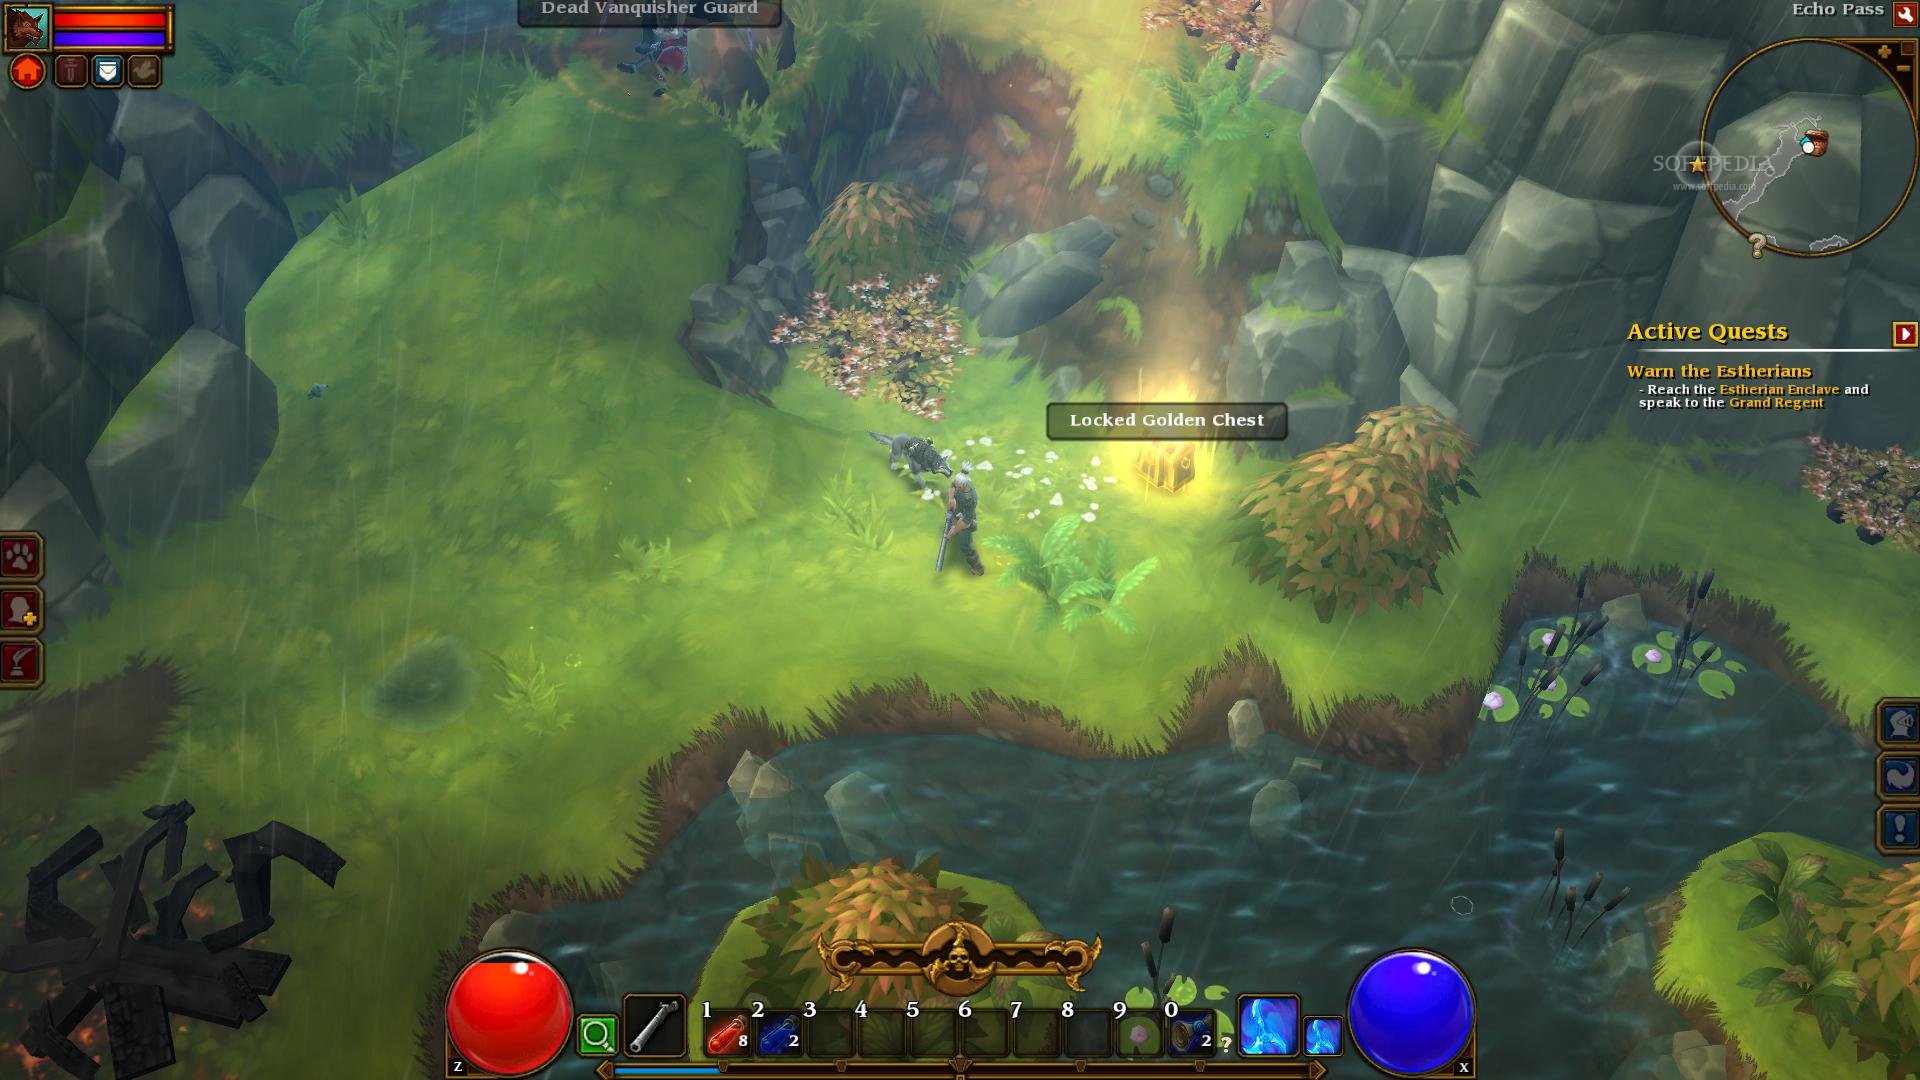 free download torchlight 2 pc